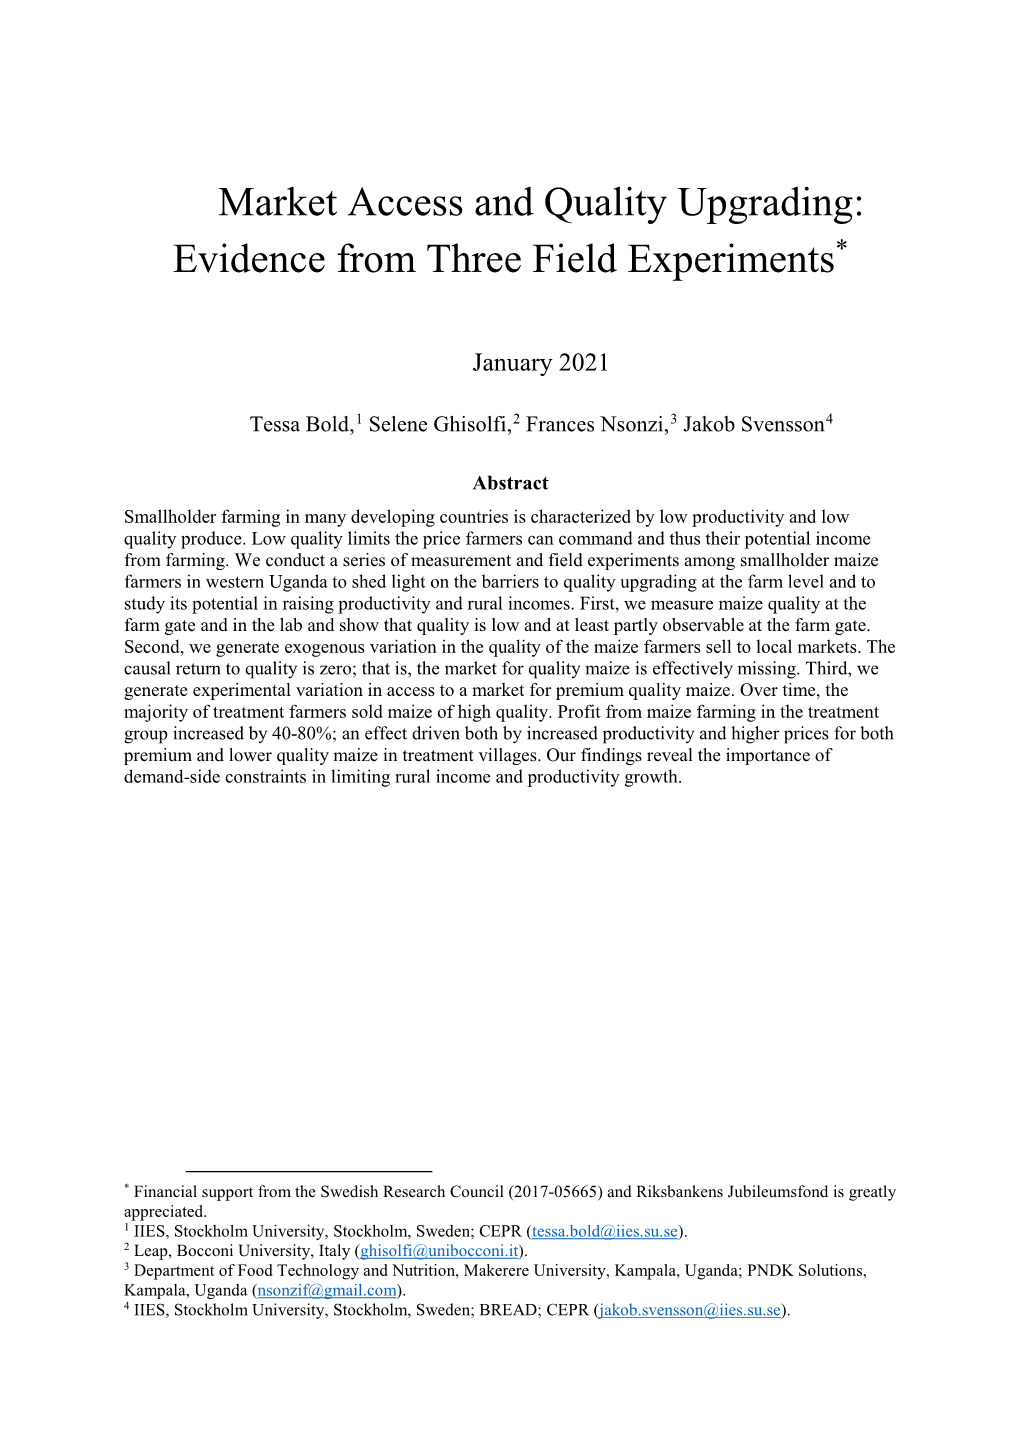 Market Access and Quality Upgrading: Evidence from Three Field Experiments*